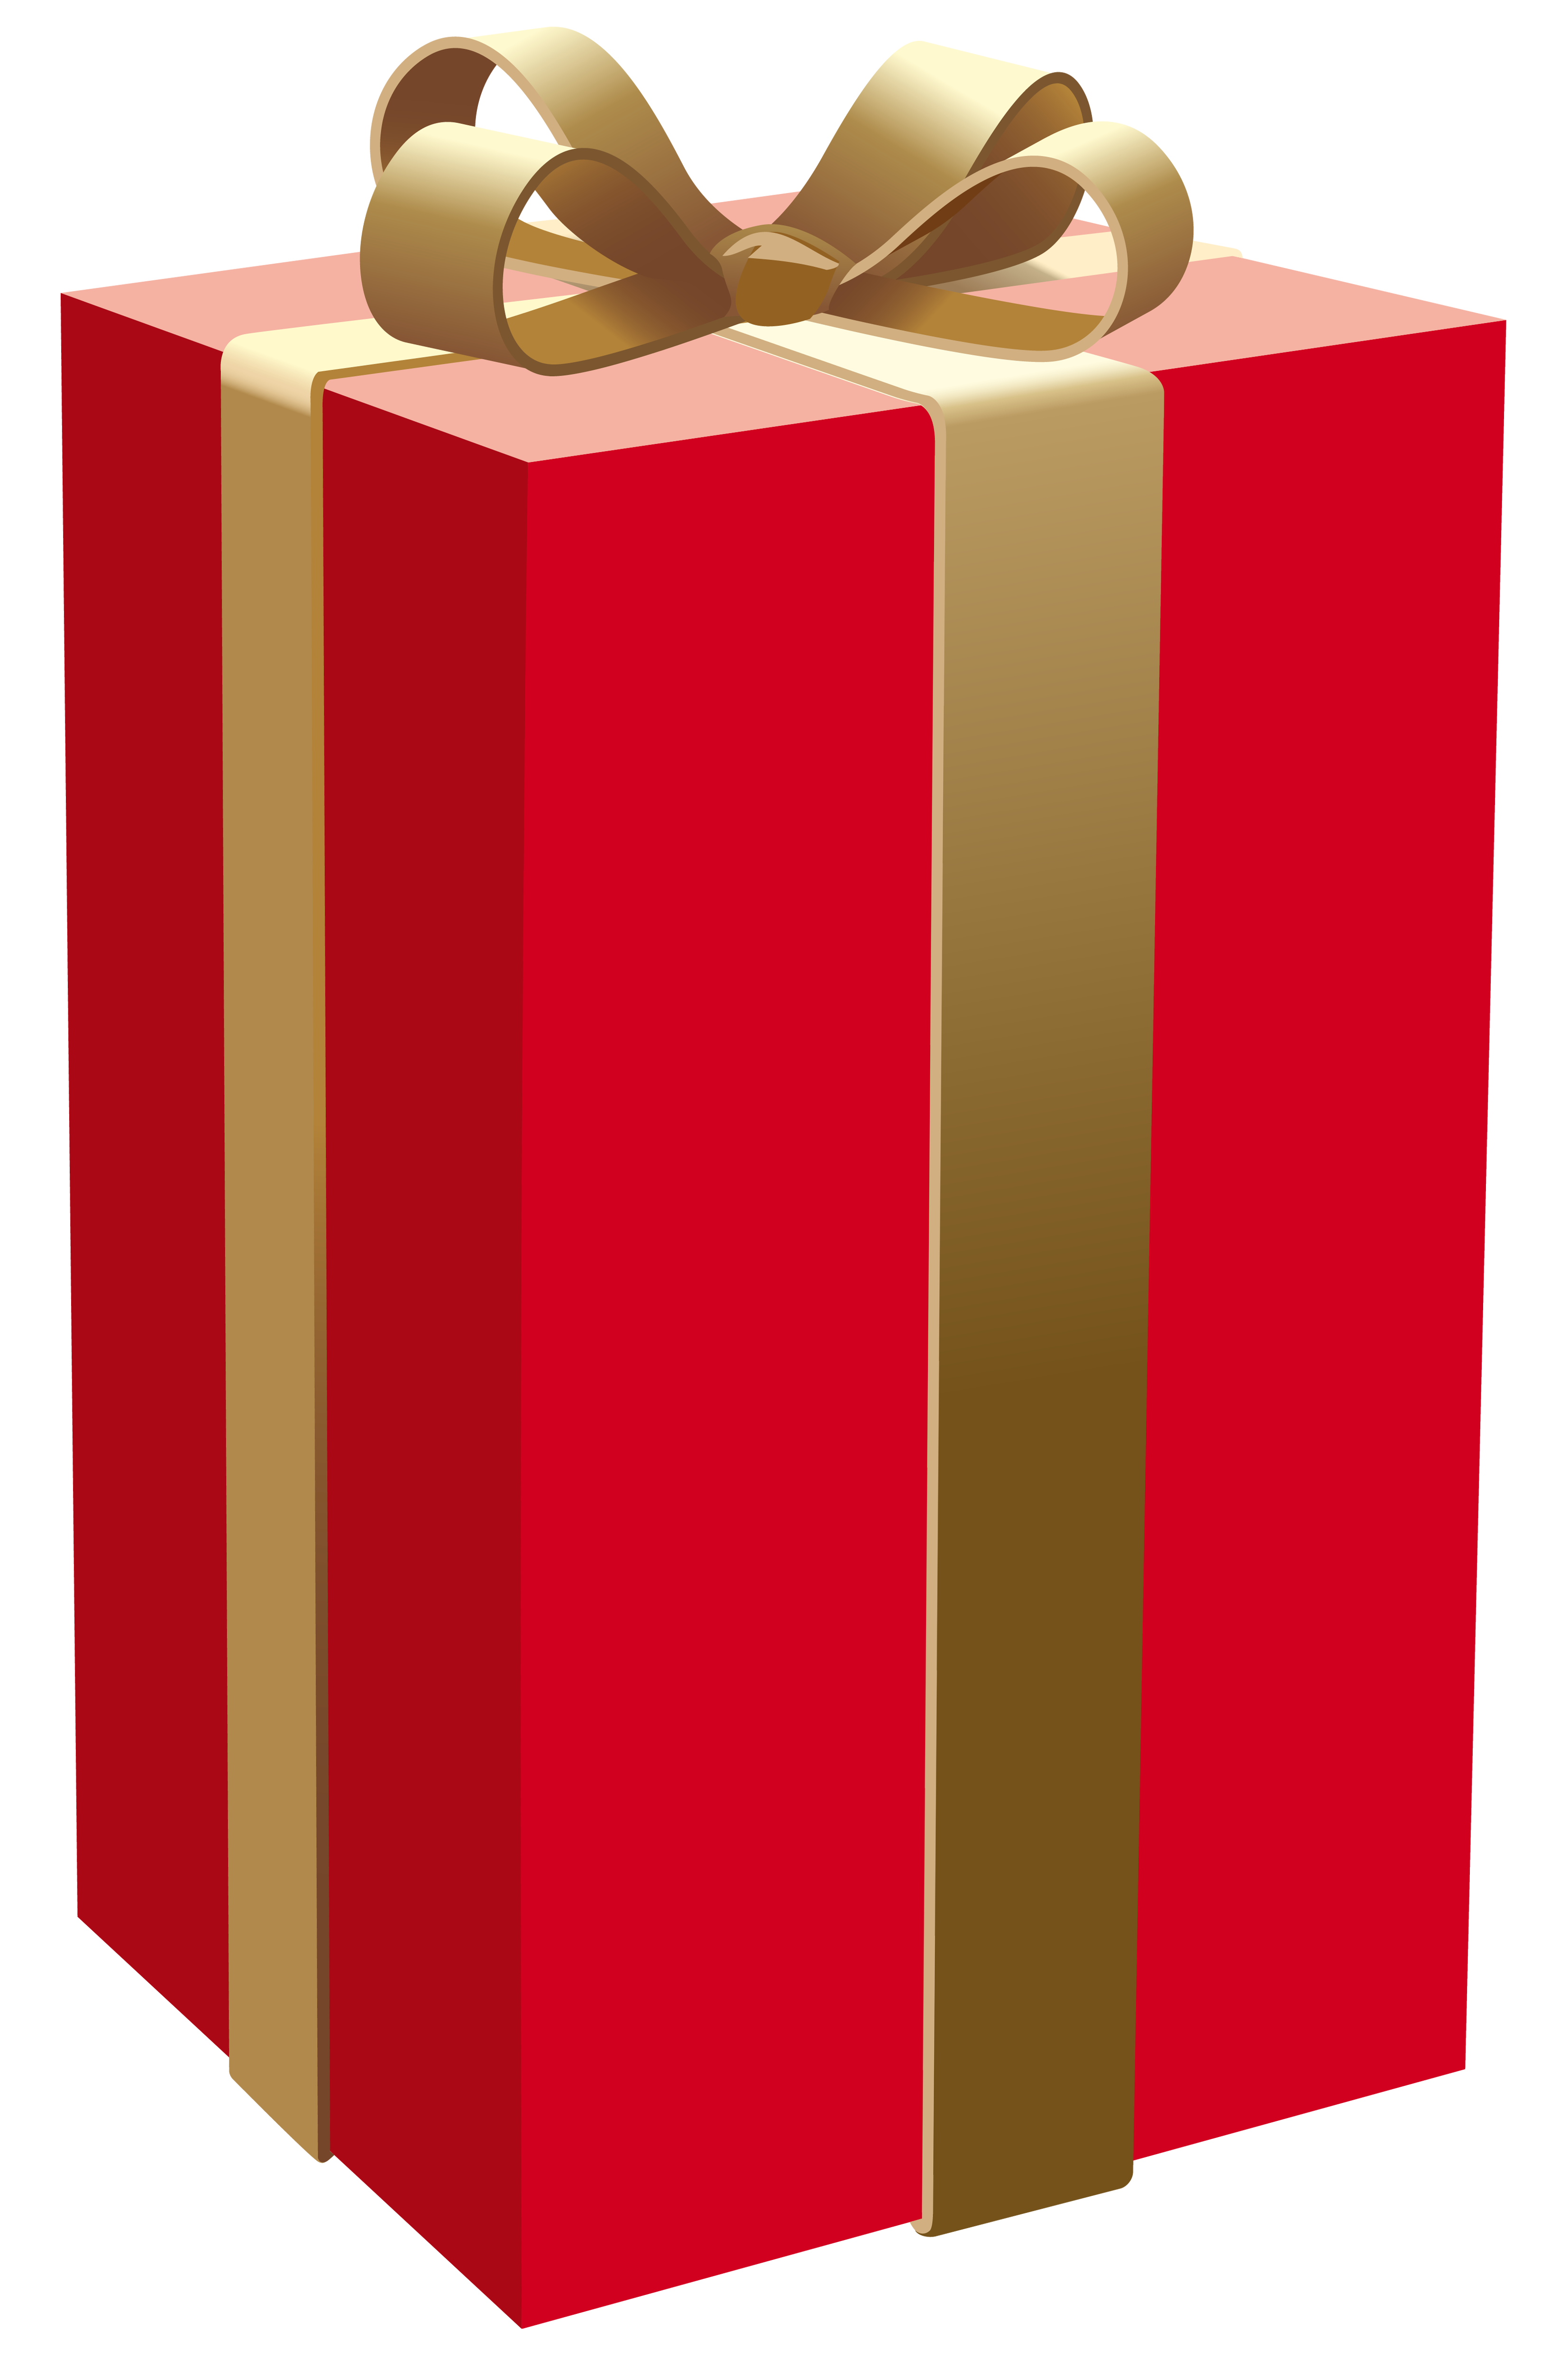 Red Gift Box PNG Clipart - Best WEB Clipart